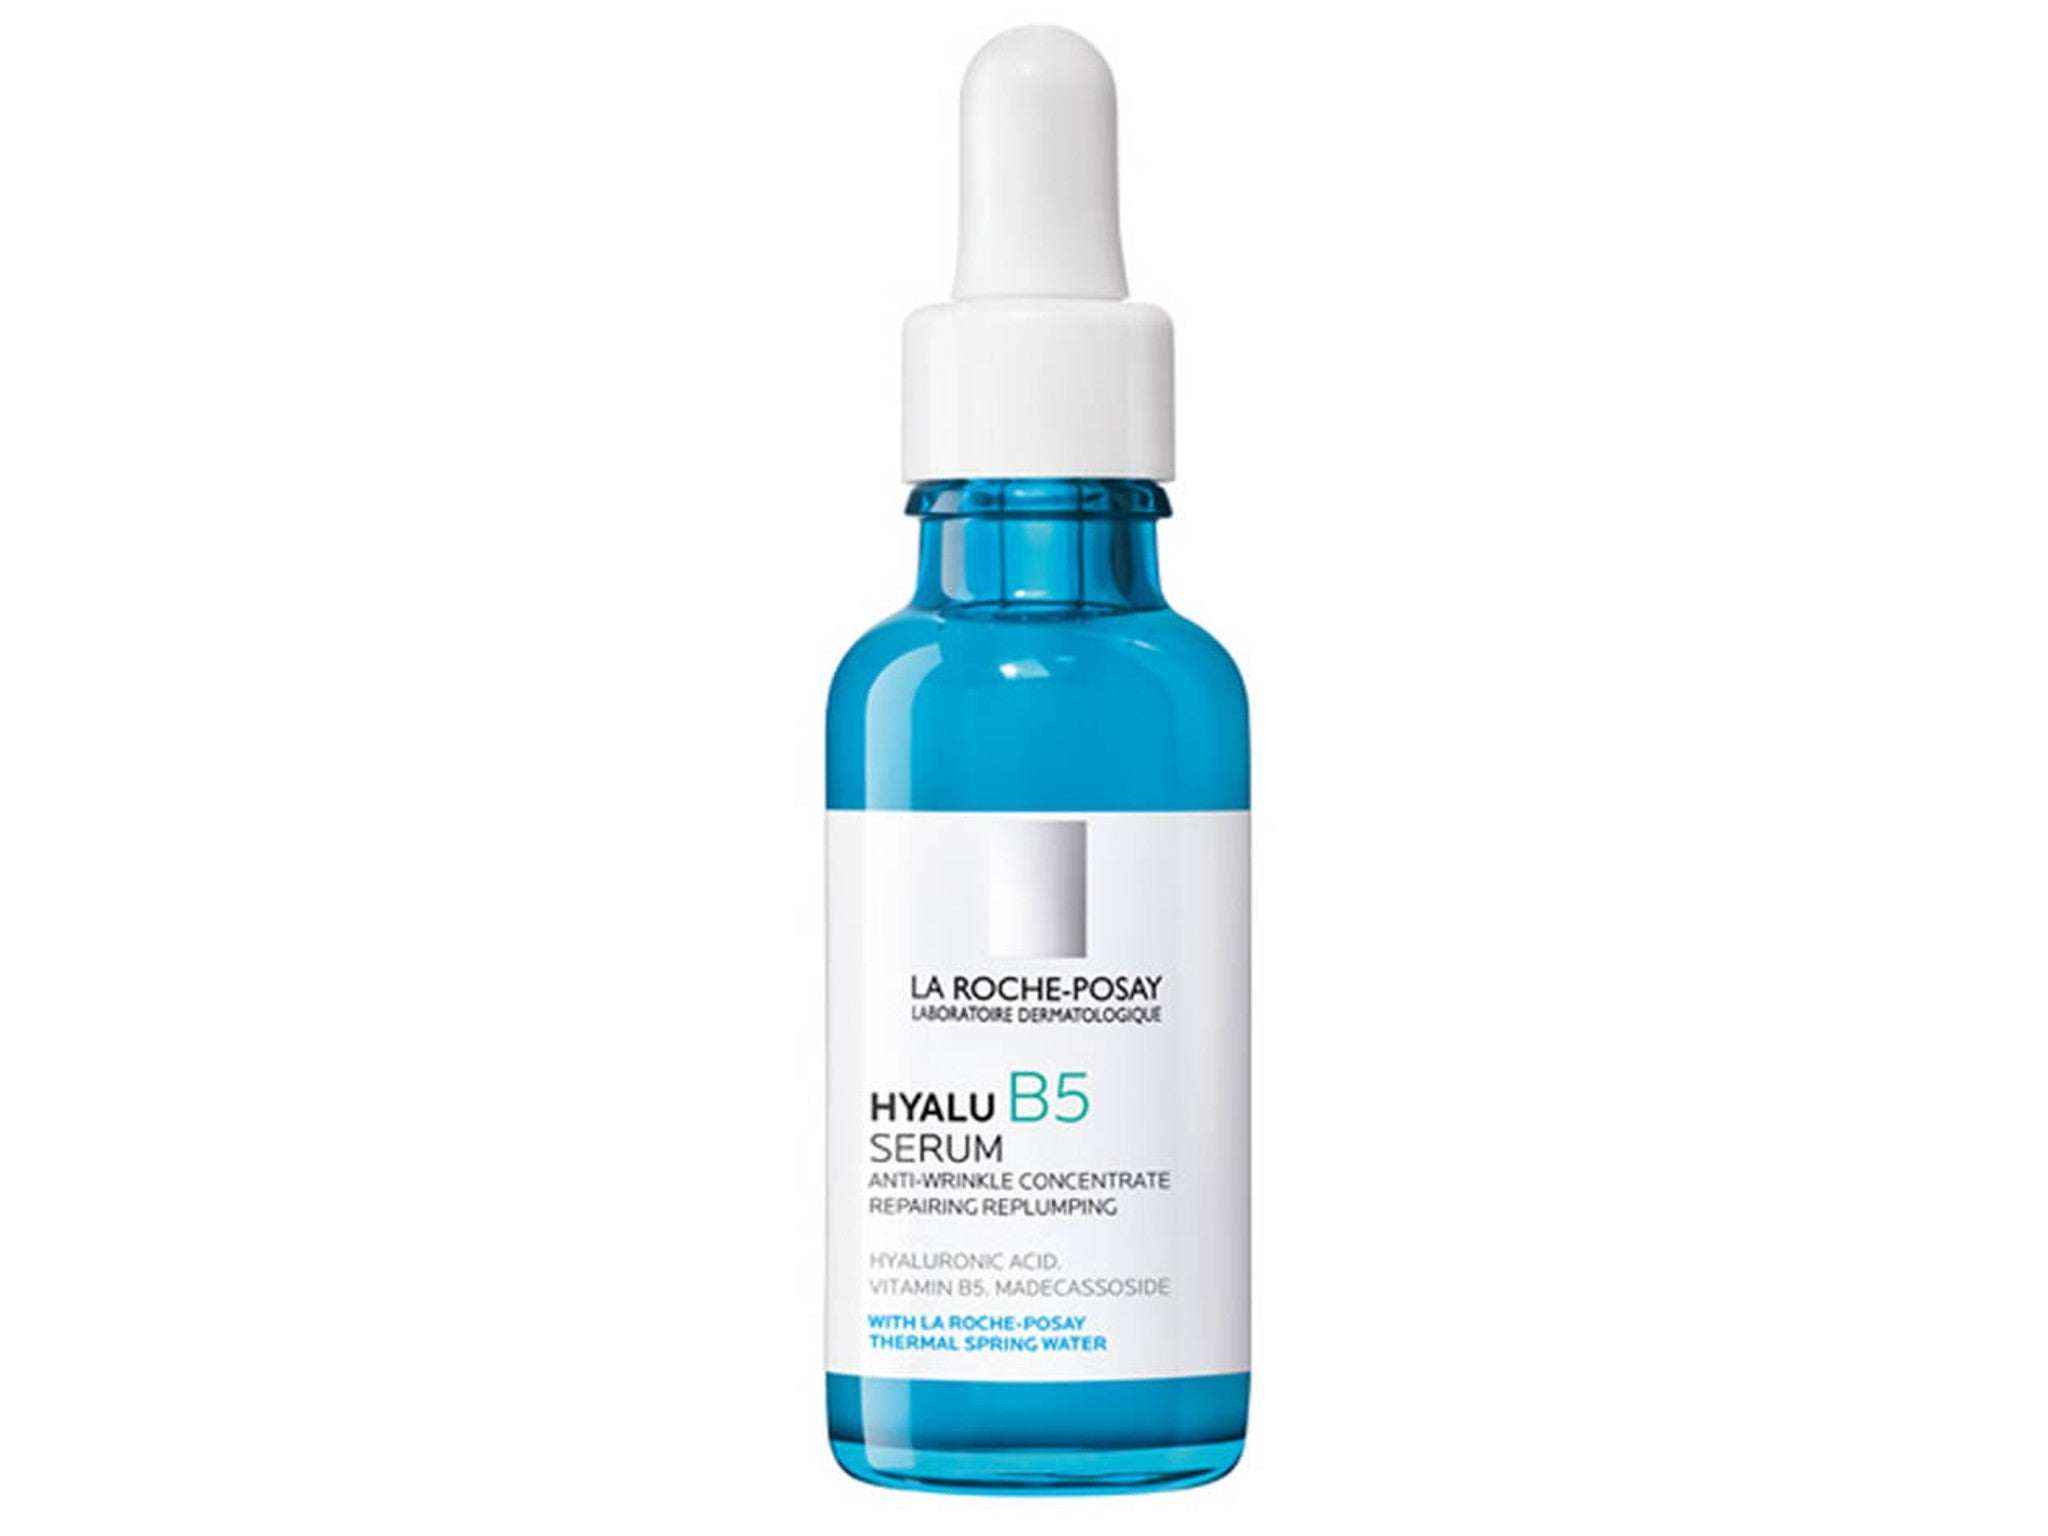 Formulated to help boost dehydrated skin, this serum can be applied before and after moisturiser